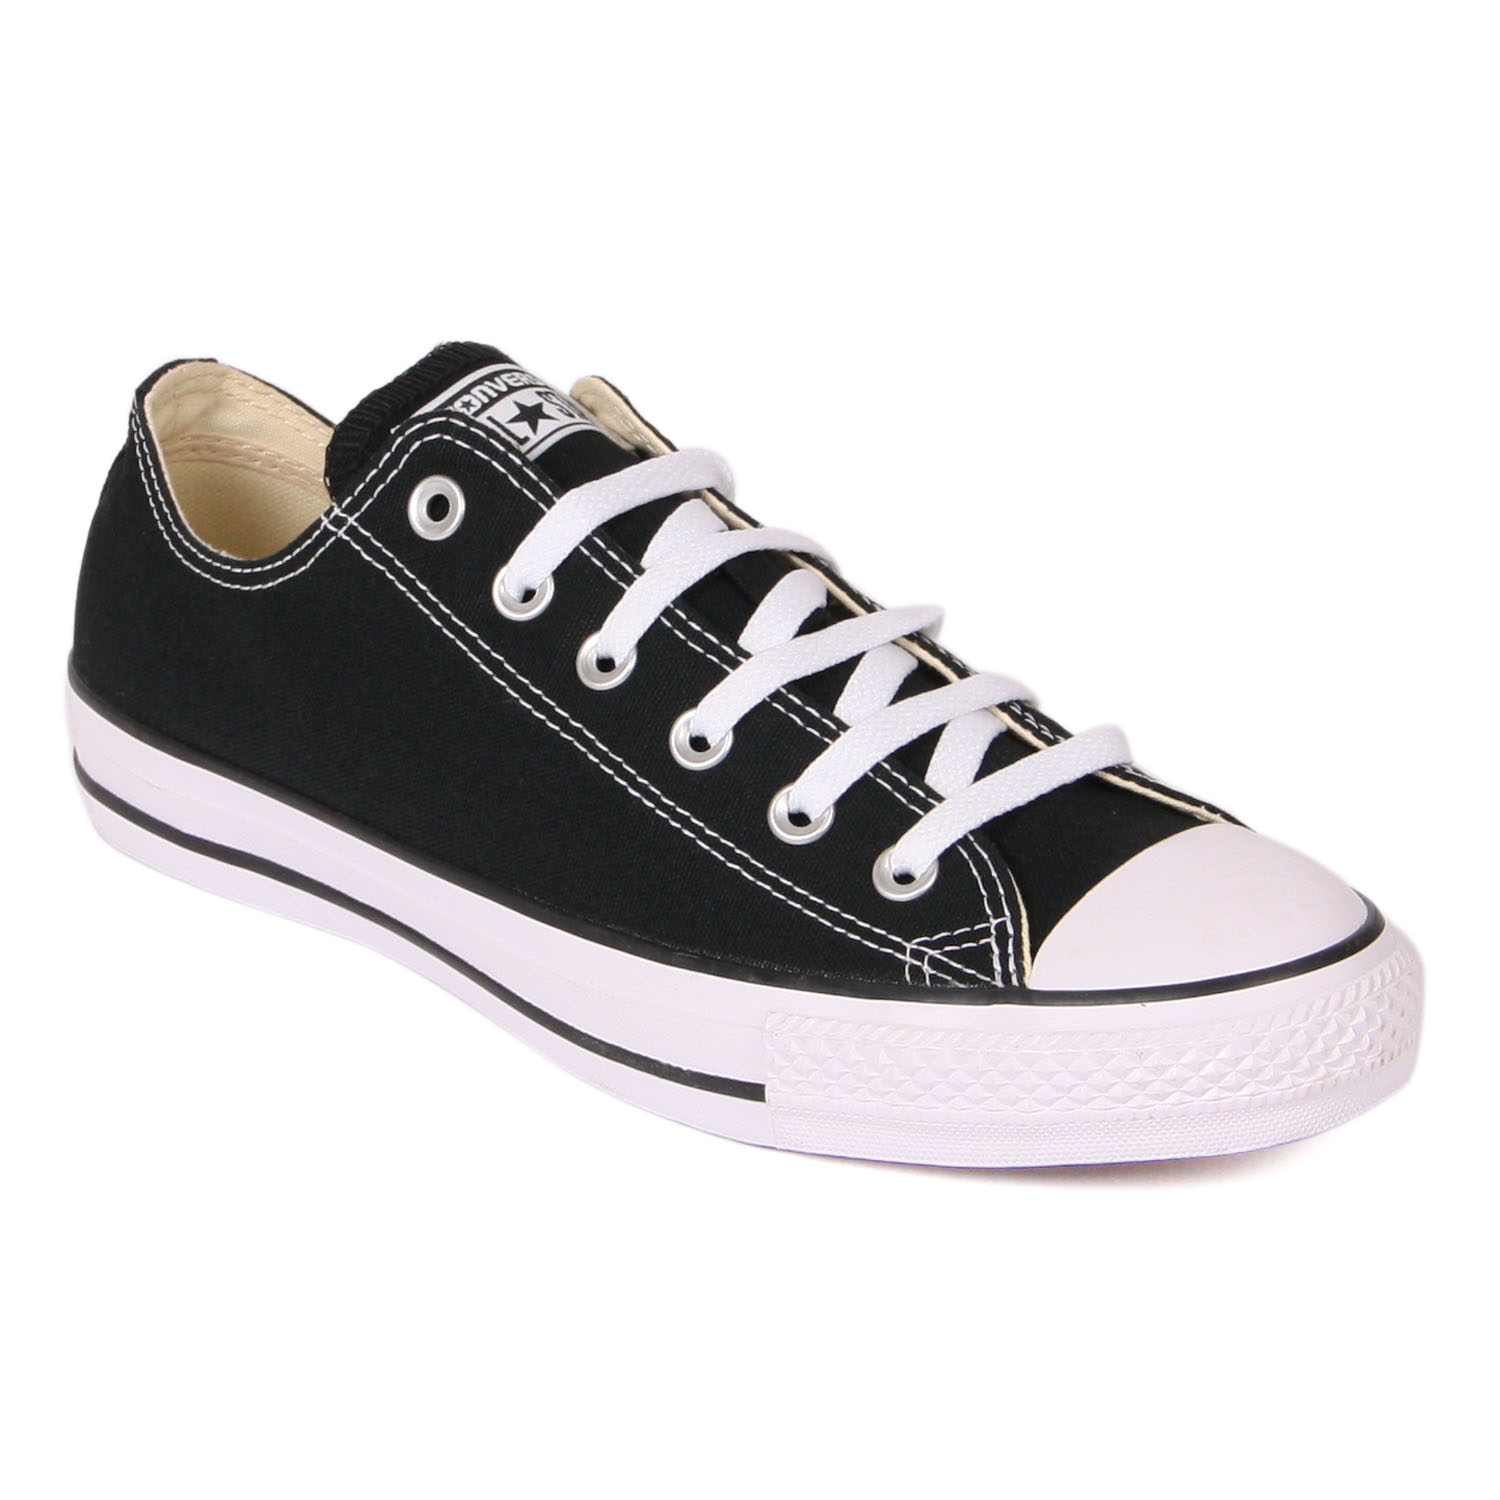 Buy Converse Men's Black Lace-up Sneaker Shoes Online @ ₹2499 from ...